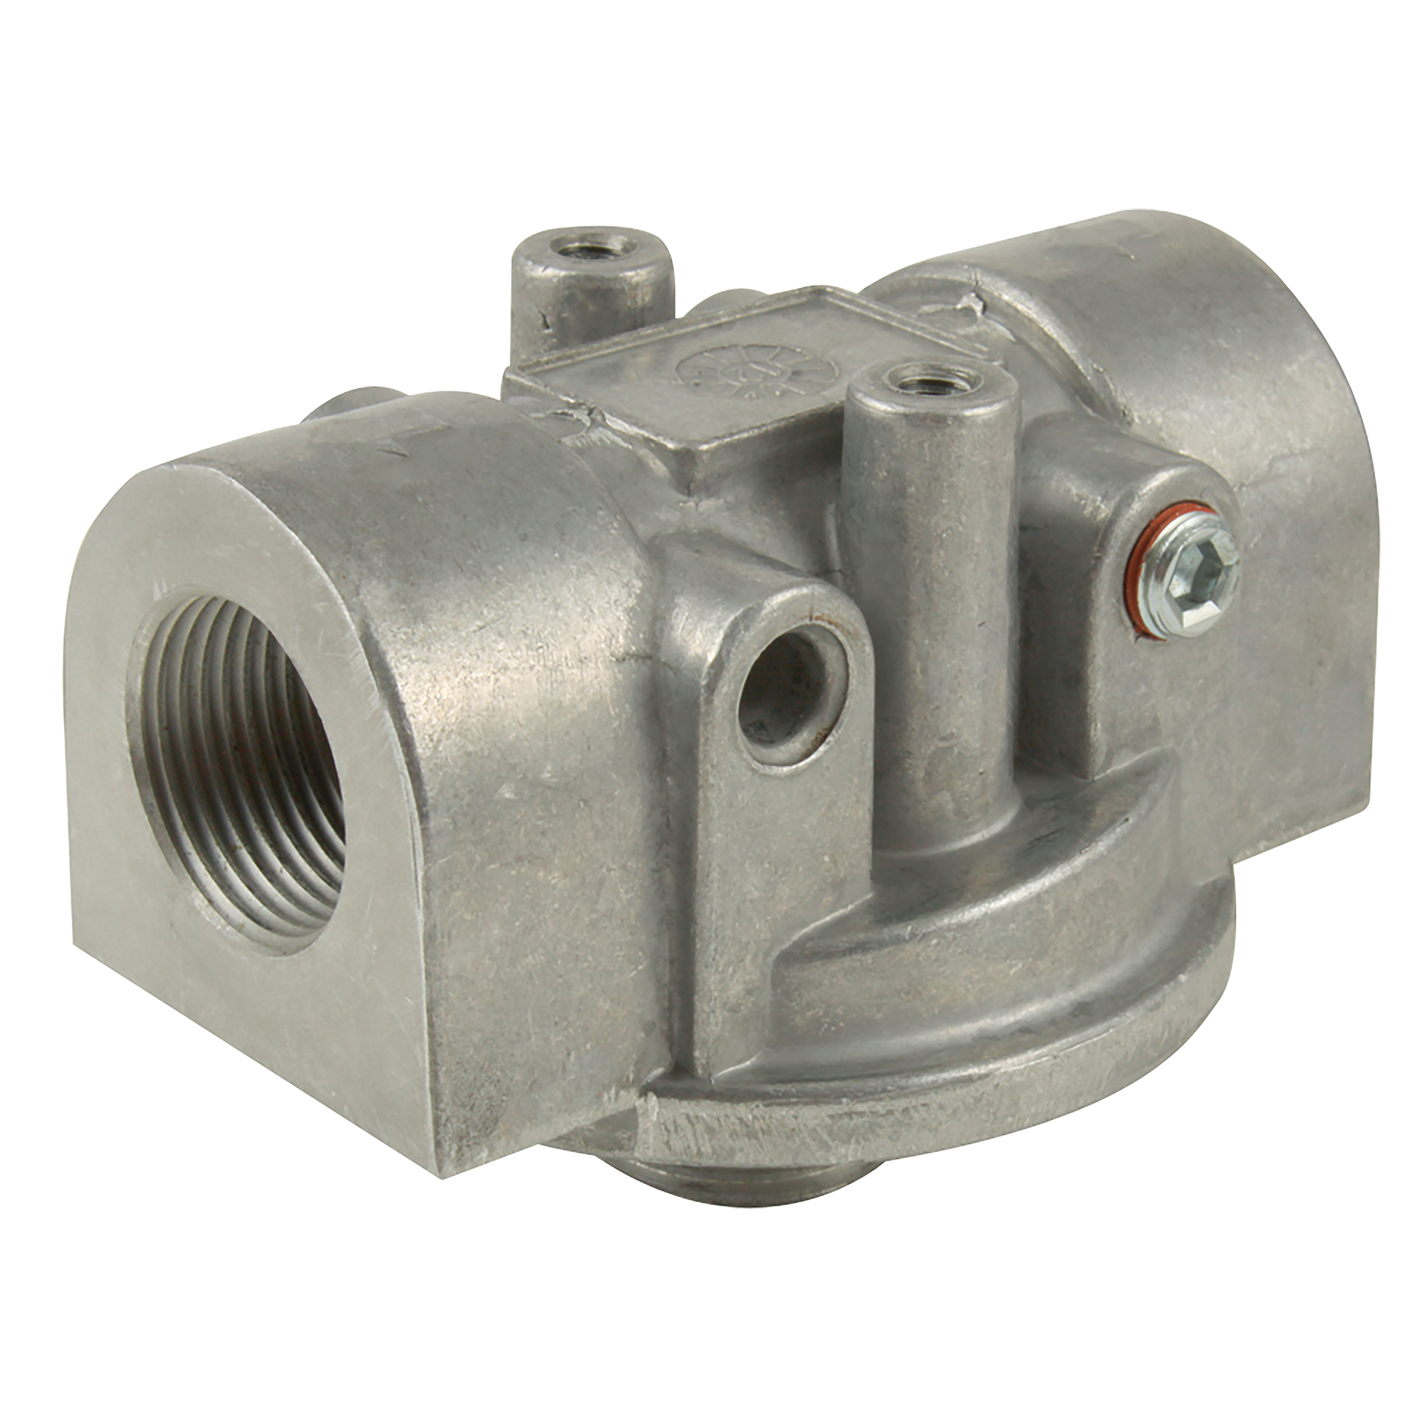 1/2" BSP Female In-line Spin-on Filter Head